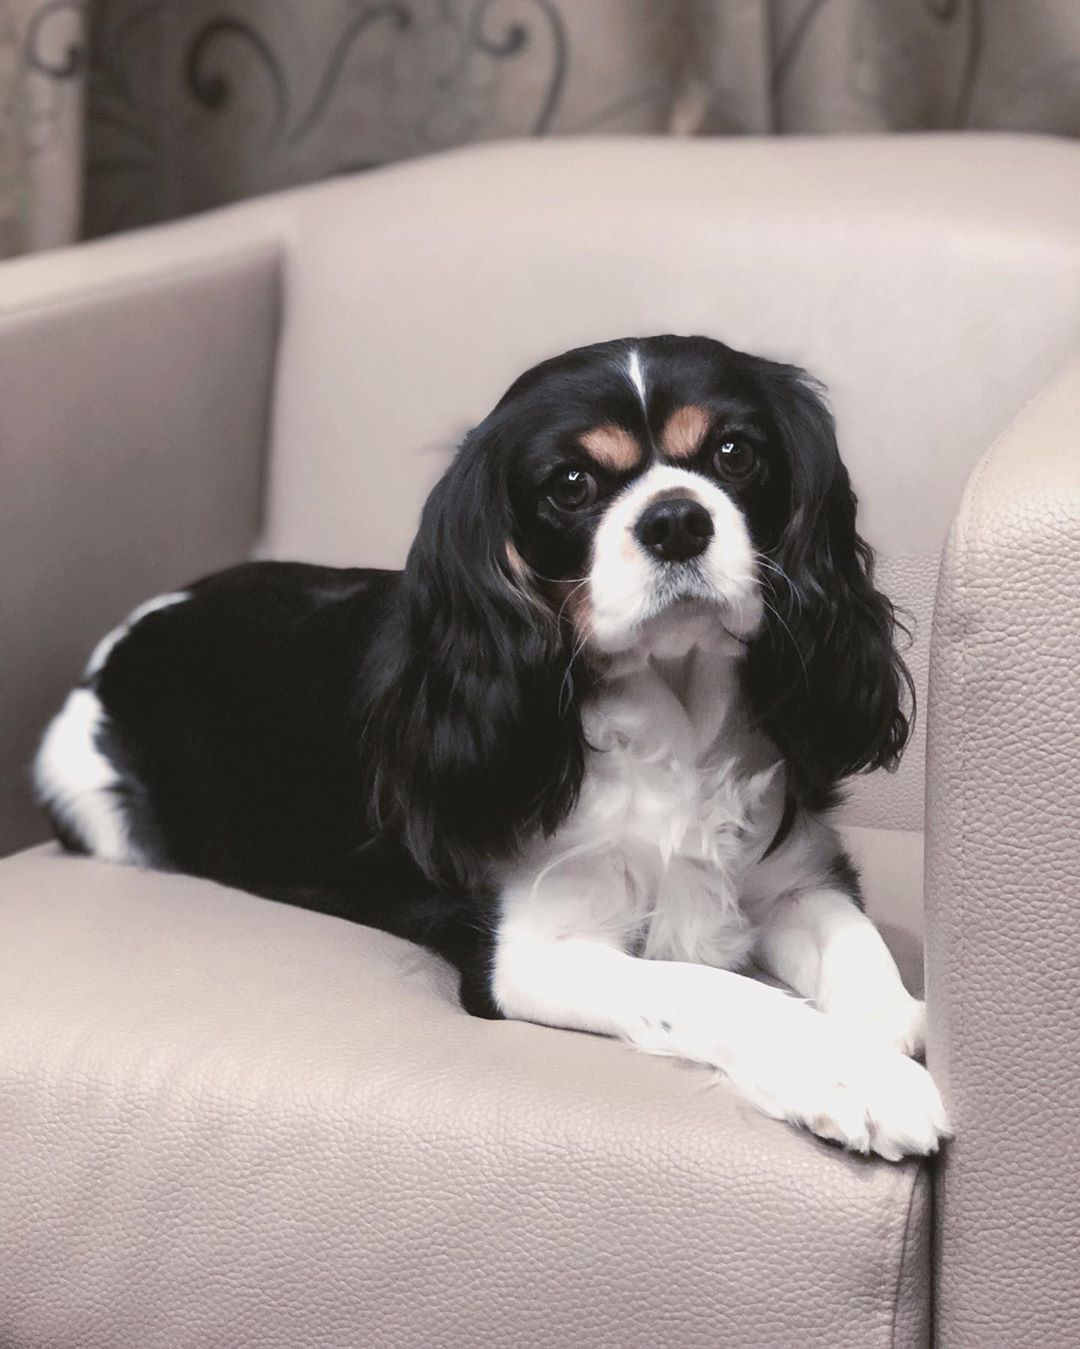 Cavalier King Charles Spaniel lying on the couch